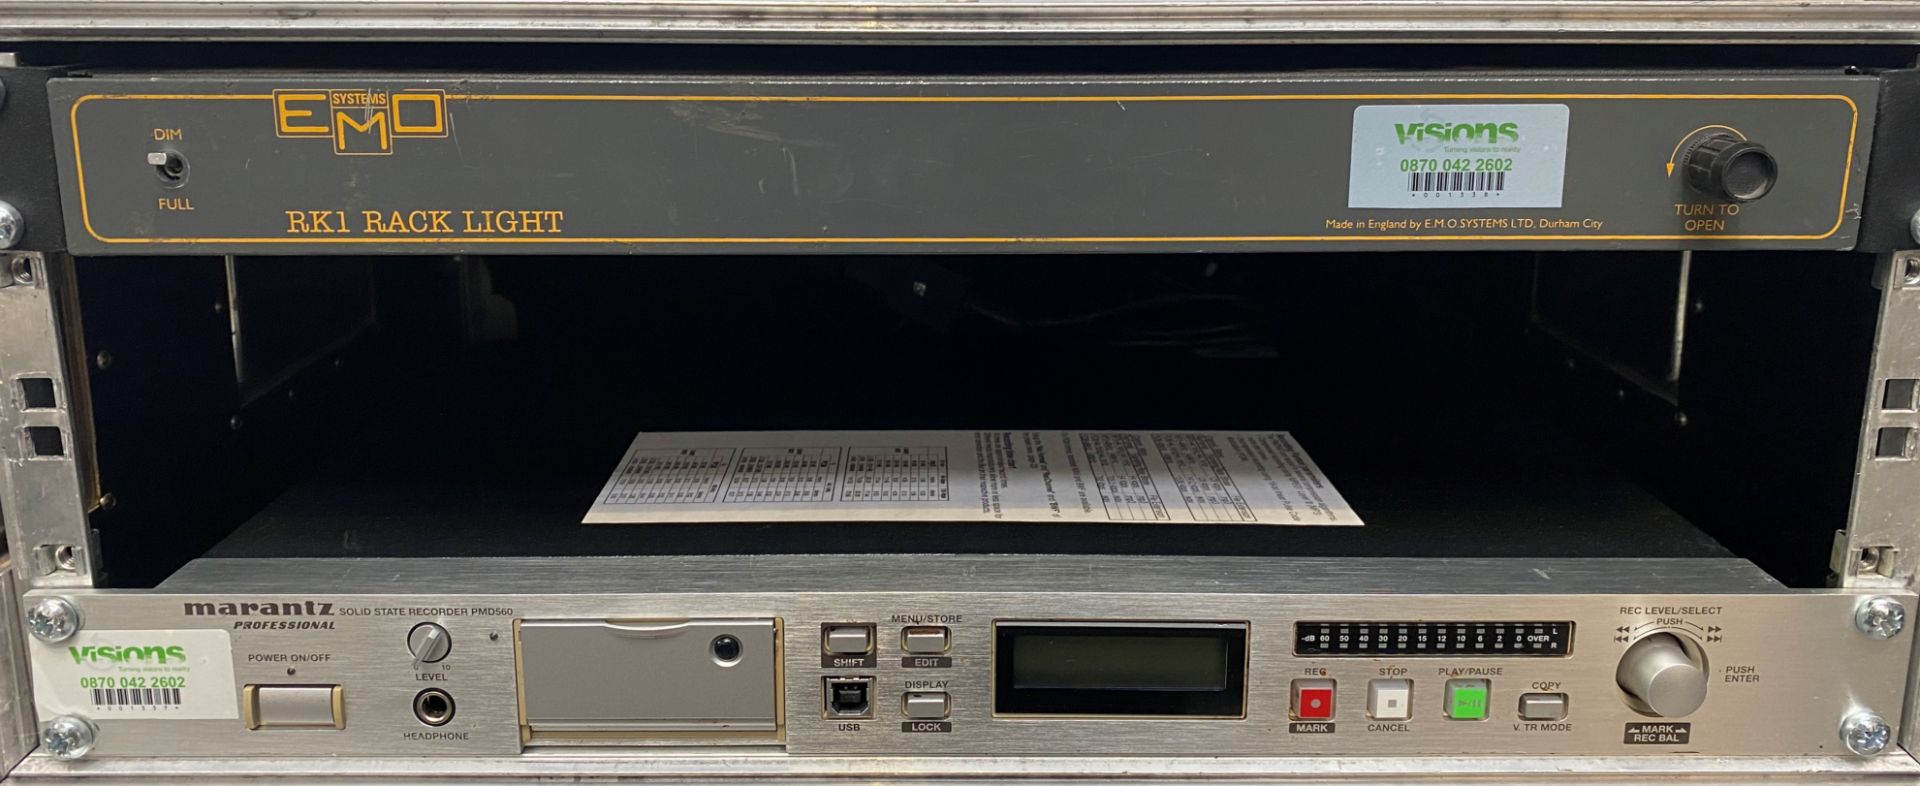 A Marantz PMD560 Solid State Recorder with EMO Systems RK1 Rack Light and flight case (condition